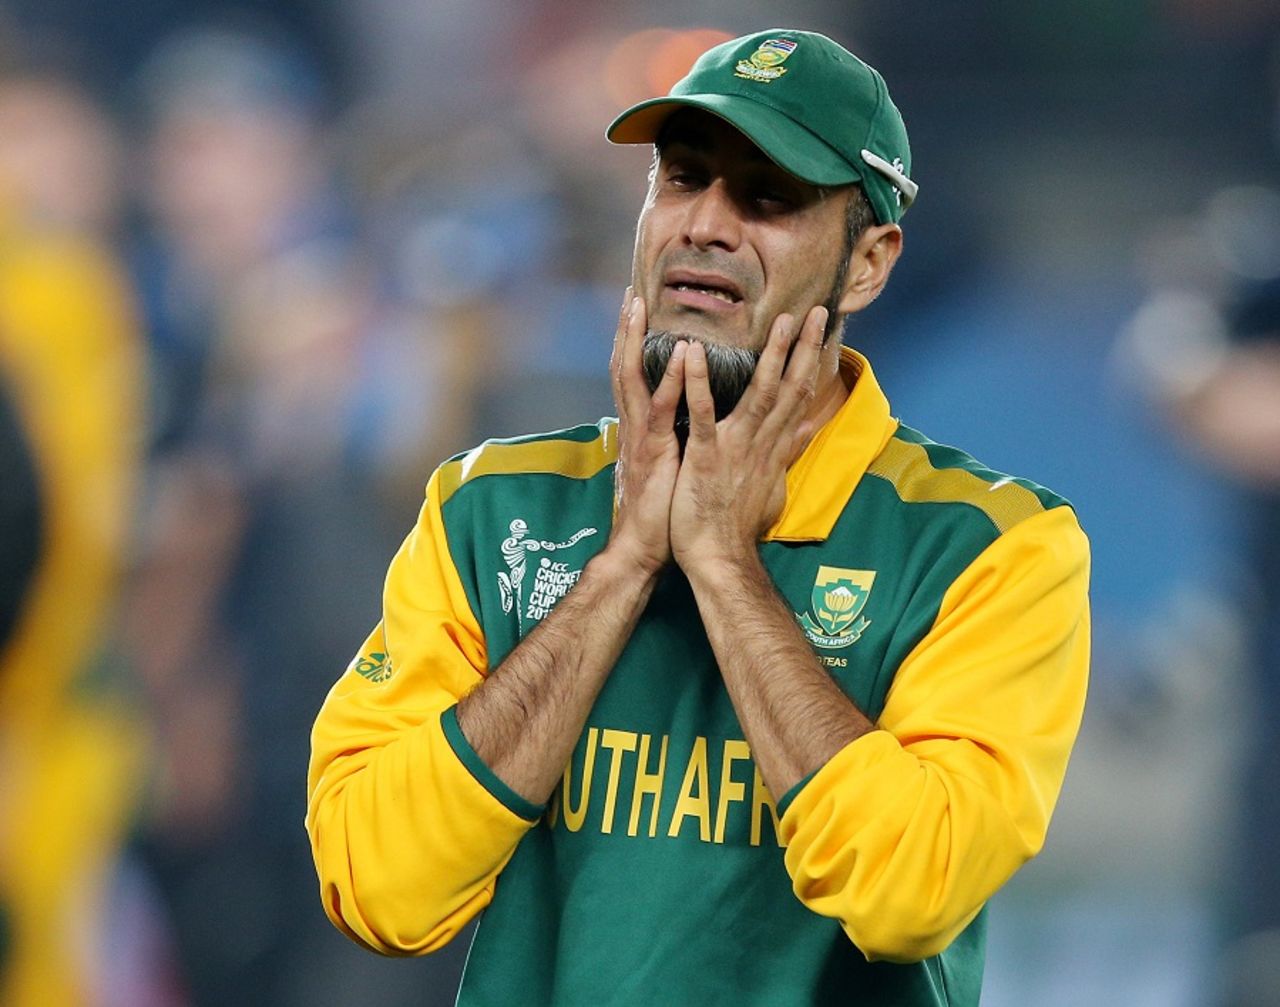 Imran Tahir was left dejected after his side's heart-breaking loss, New Zealand v South Africa, World Cup 2015, 1st Semi-Final, Auckland, March 24, 2015